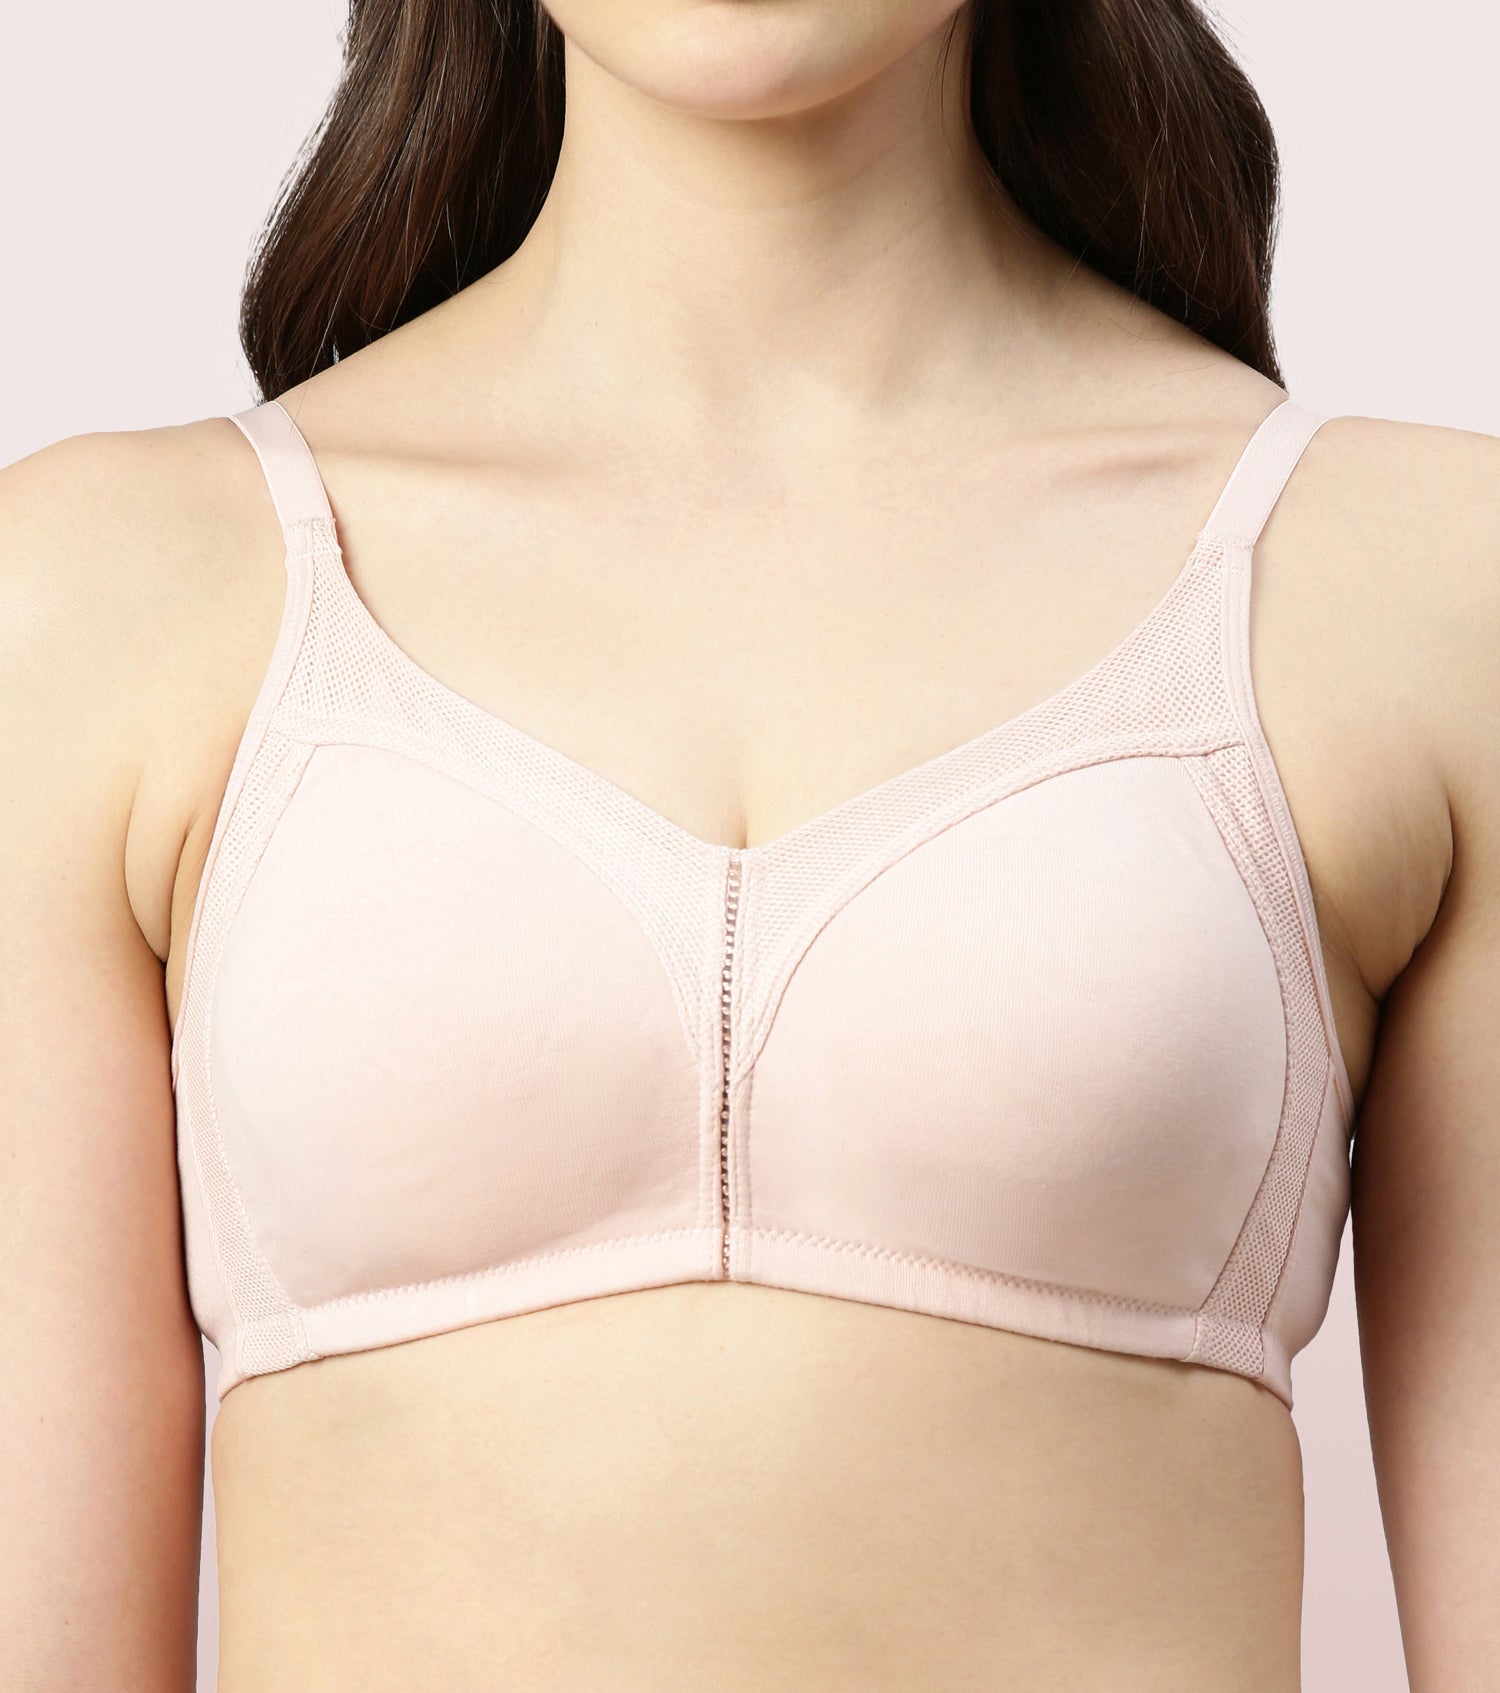 Enamor M-FrameJiggle Control Full Support Stretch Cotton Bra For Women - Non-Padded, Non-Wired Bra With Cooling Cotton Fabric | Pearl | AB75